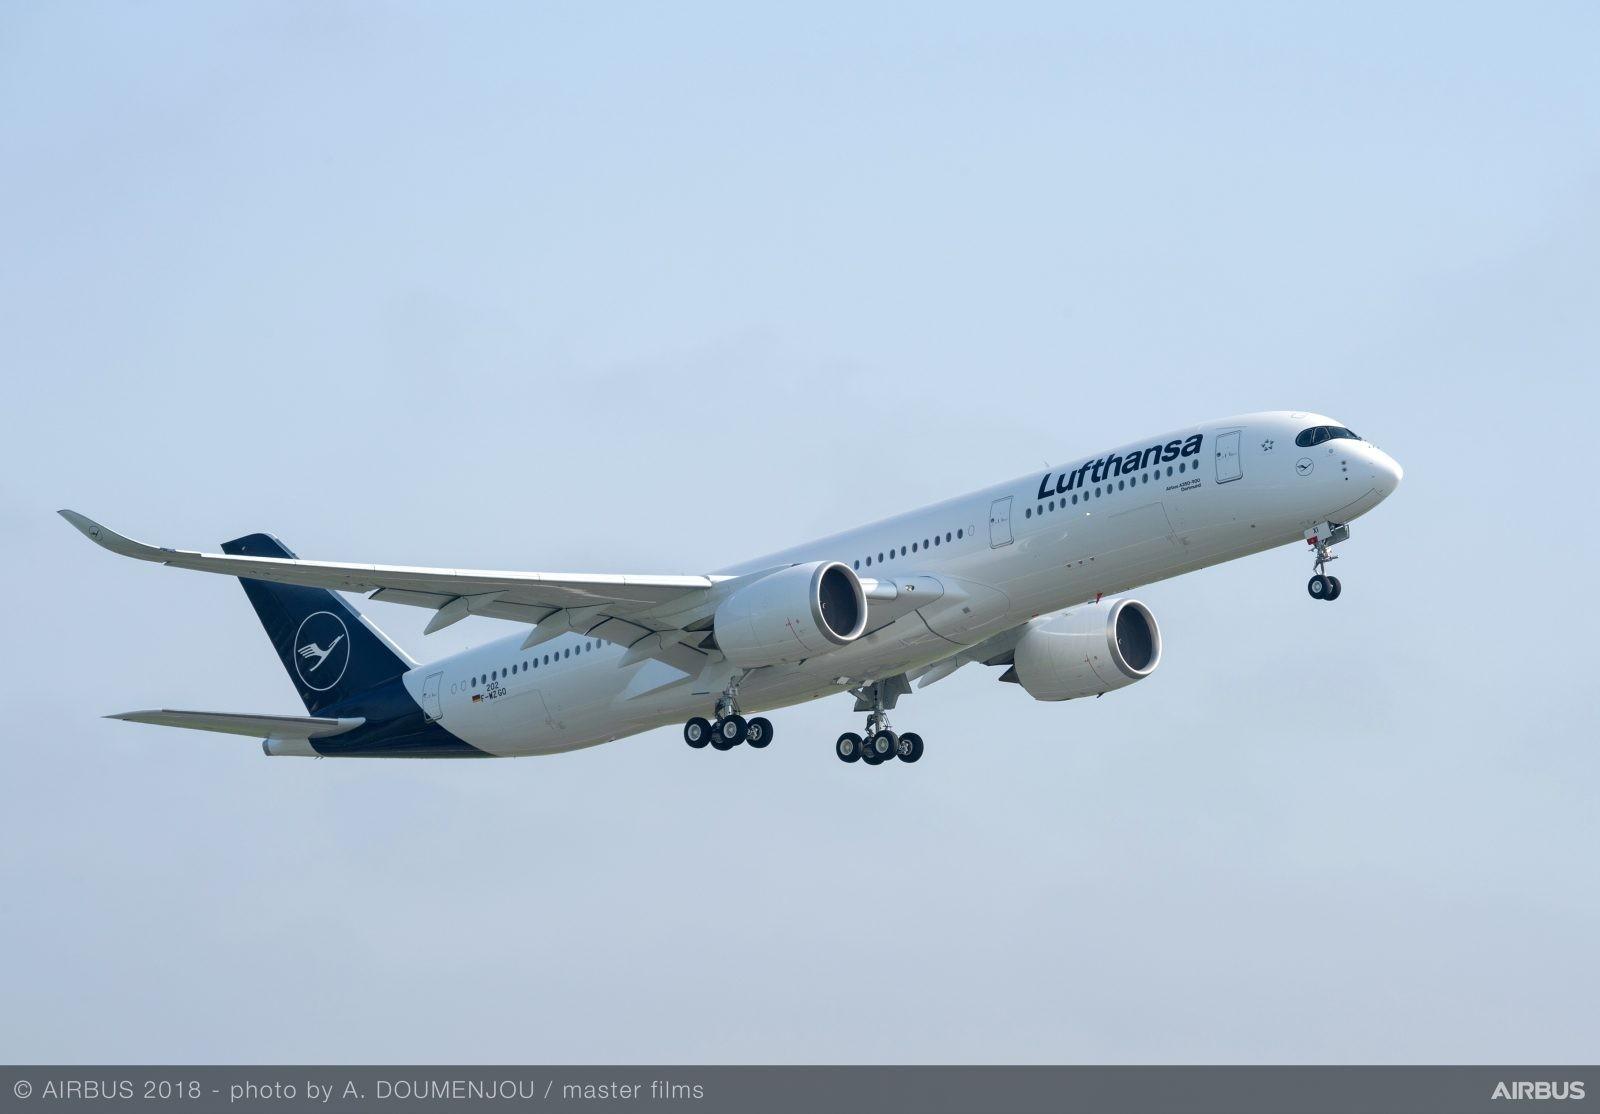 GAMECO Completes First A350 IL-Check for Lufthansa